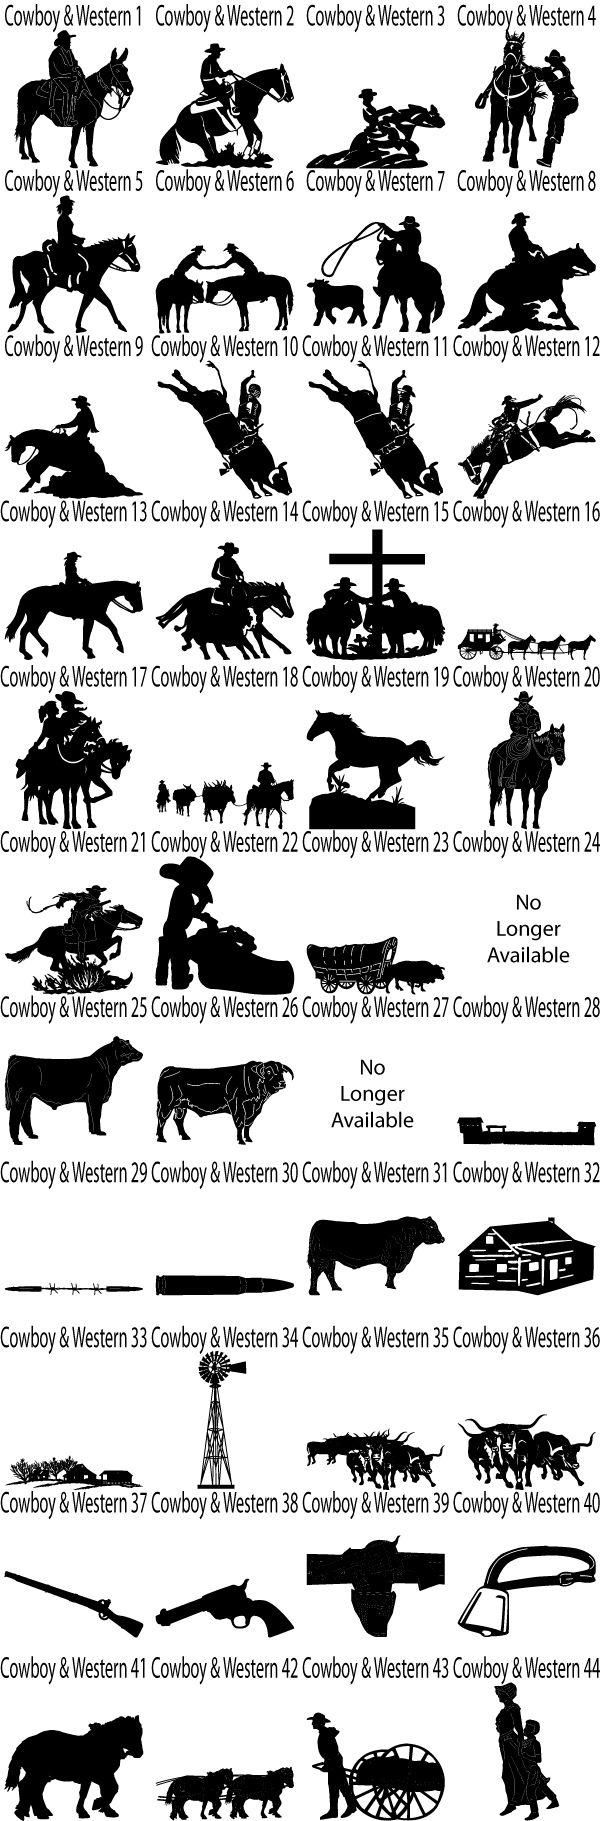 49 Best Silhouette – Cowboy Images On Pinterest | Silhouette With Western Metal Art Silhouettes (View 15 of 20)